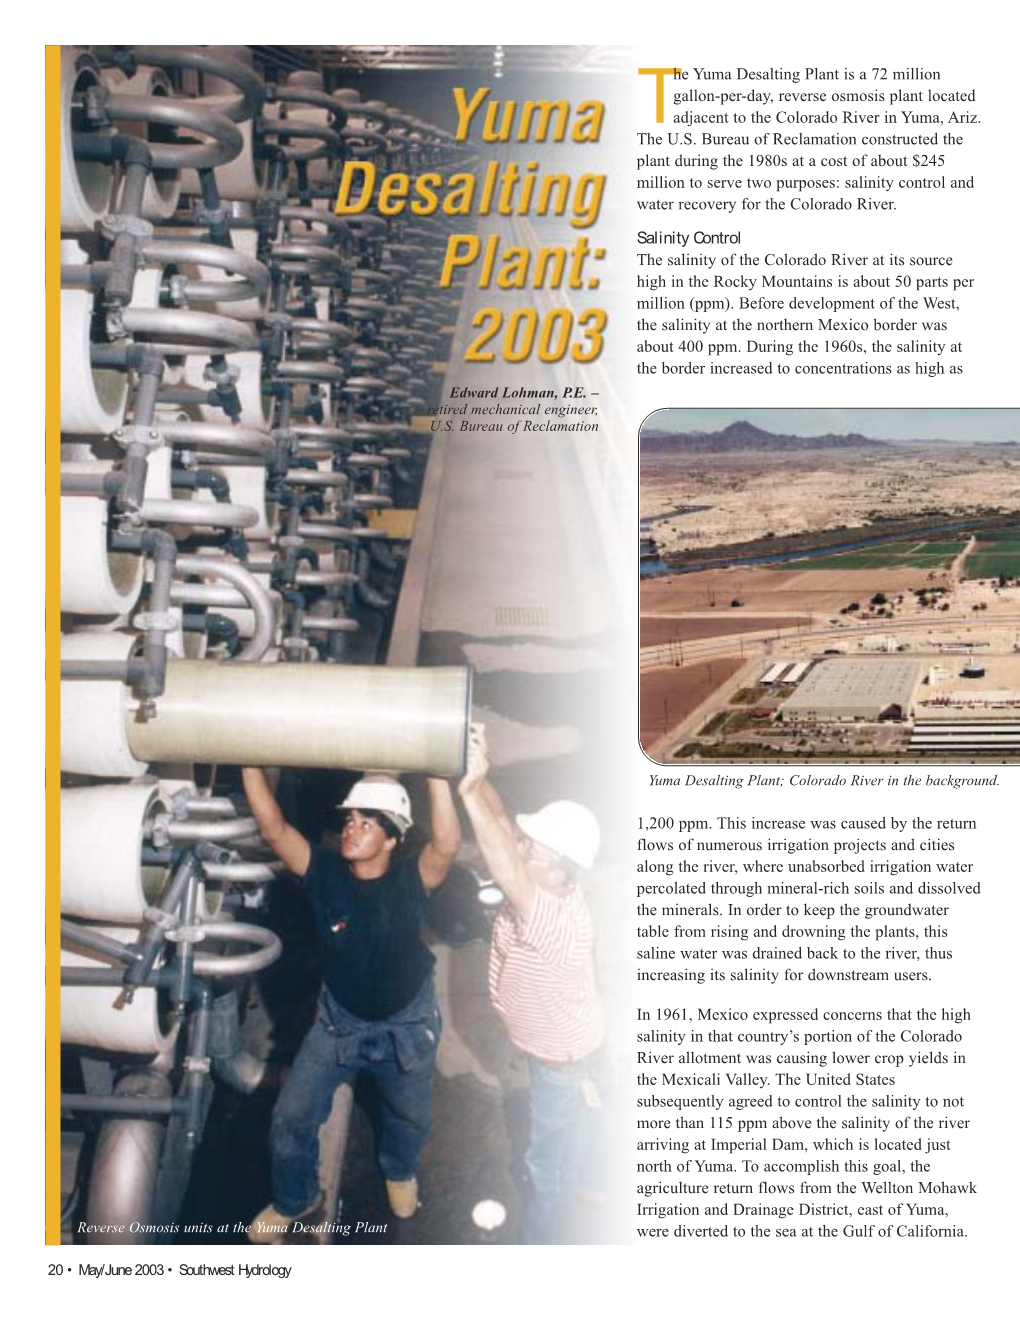 The Yuma Desalting Plant Is a 72 Million